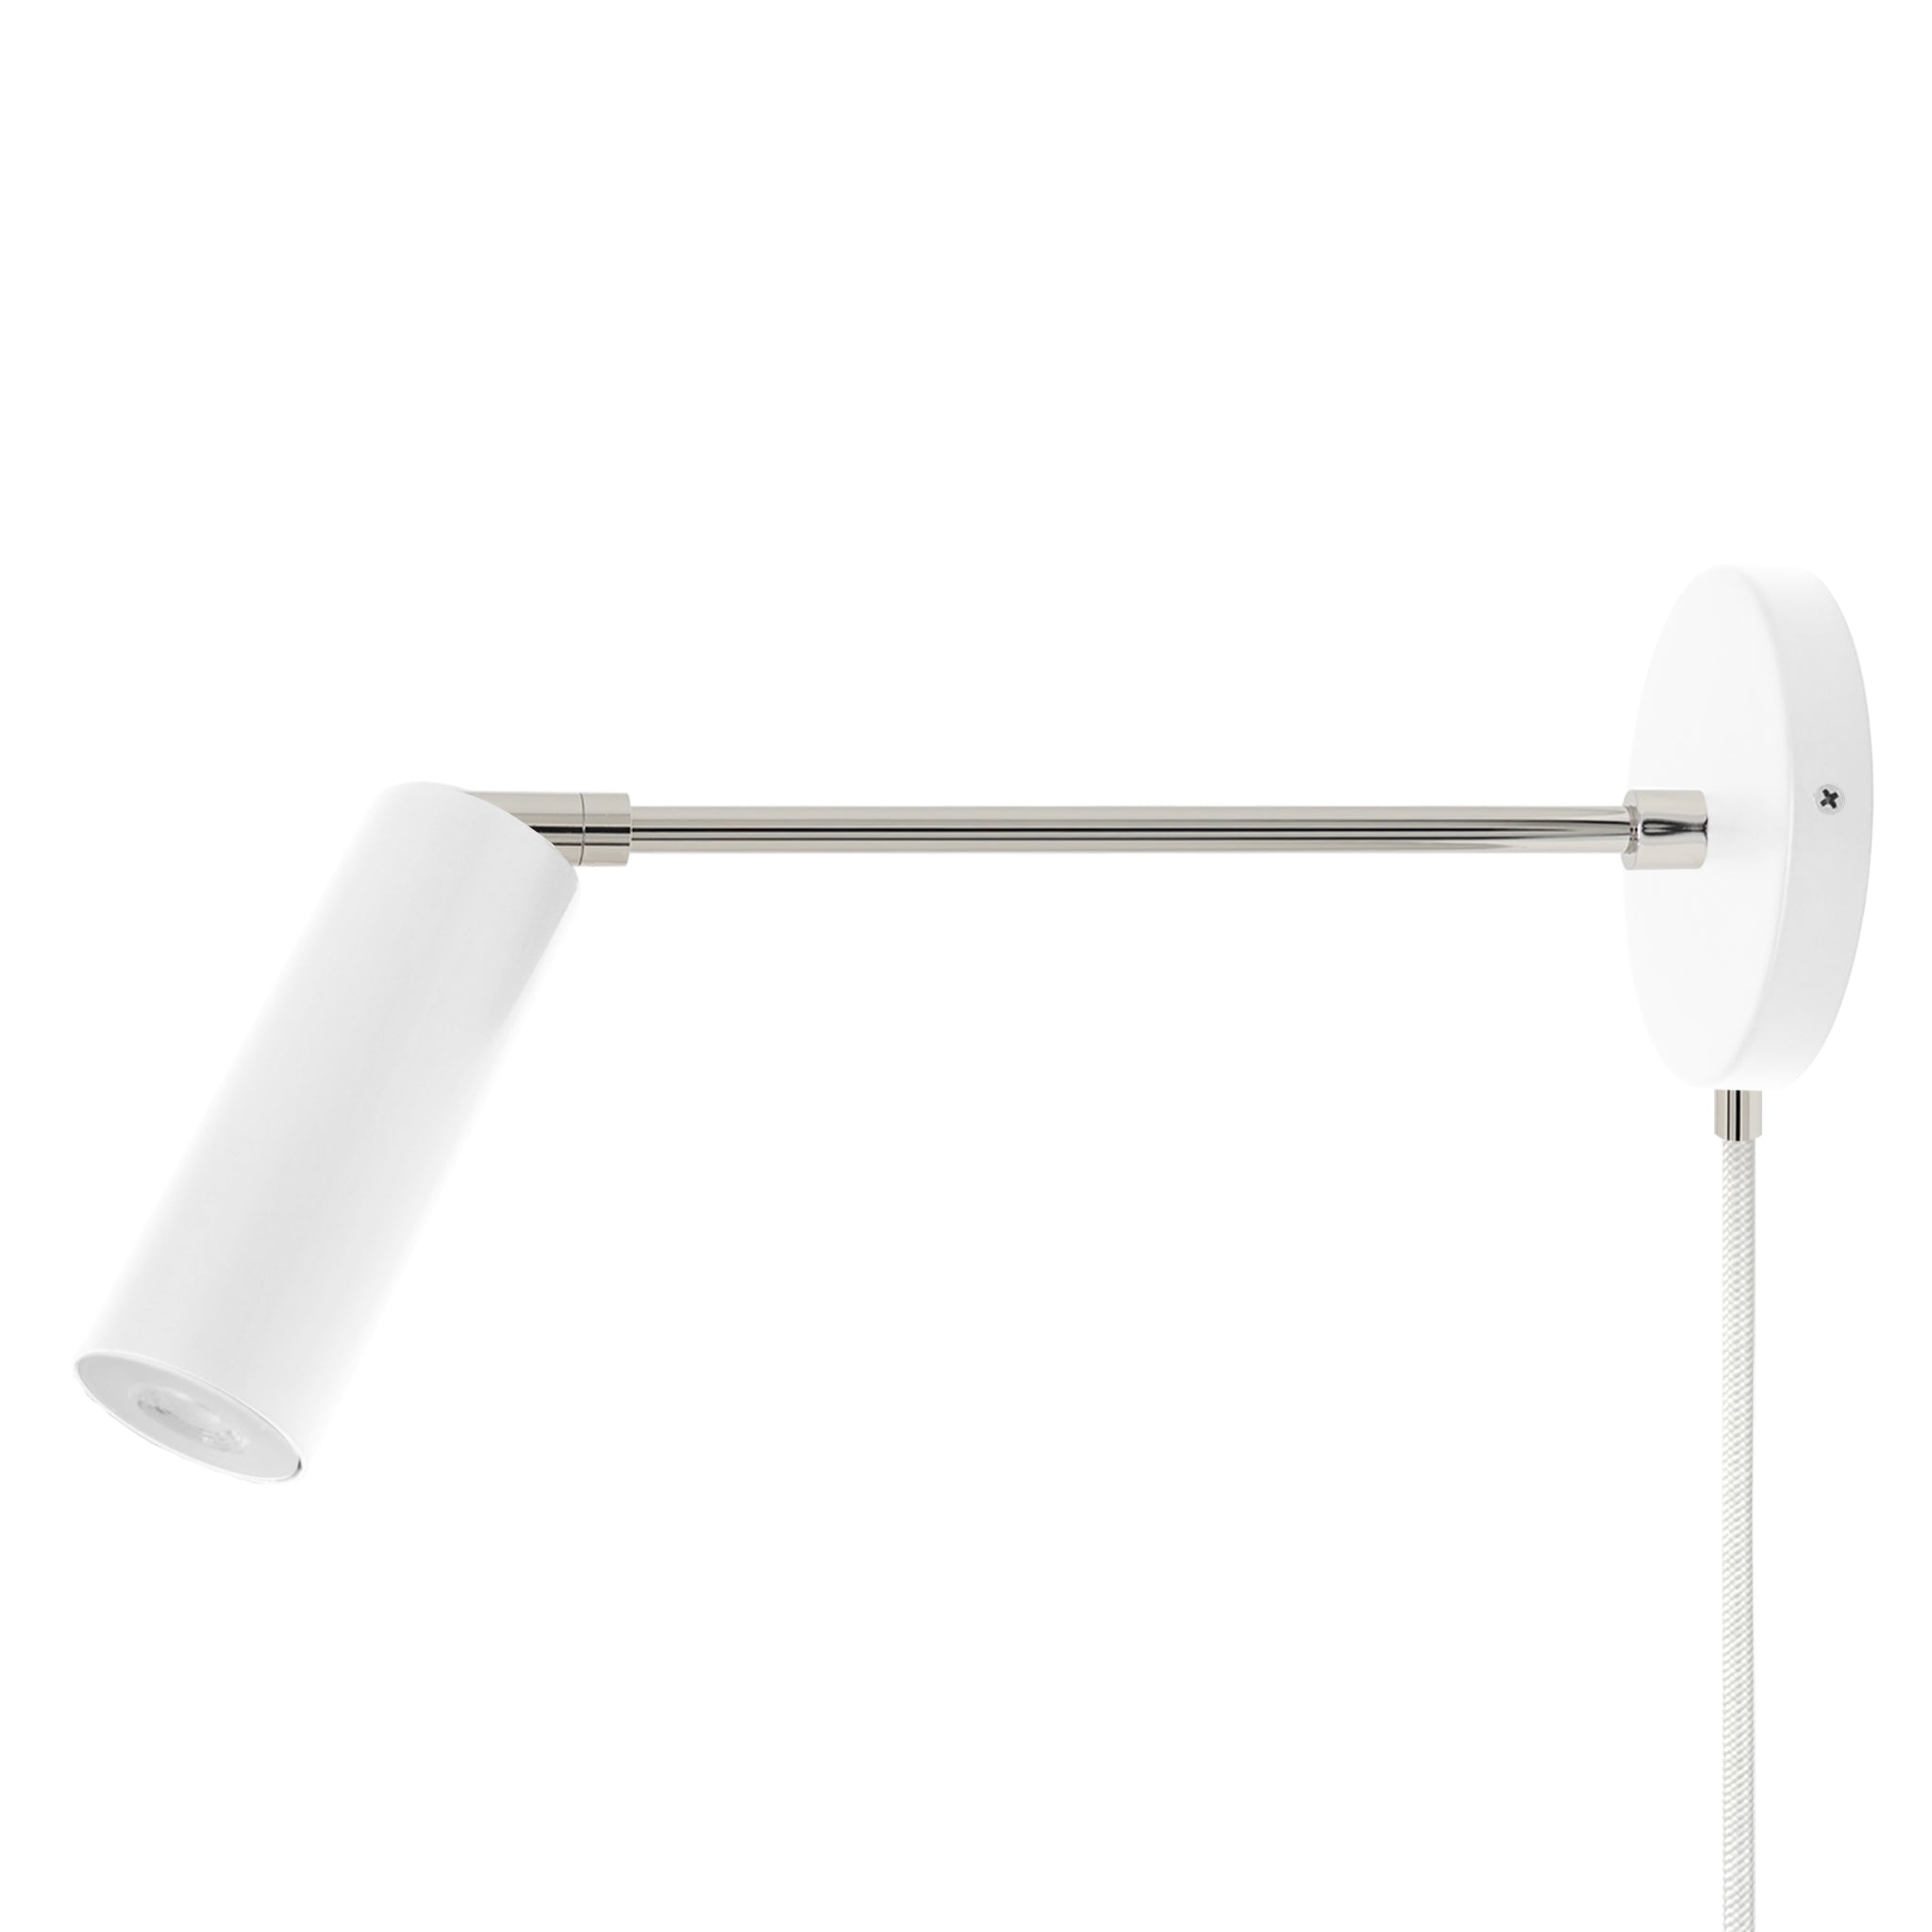 Nickel and white color Reader plug-in sconce 10" arm Dutton Brown lighting